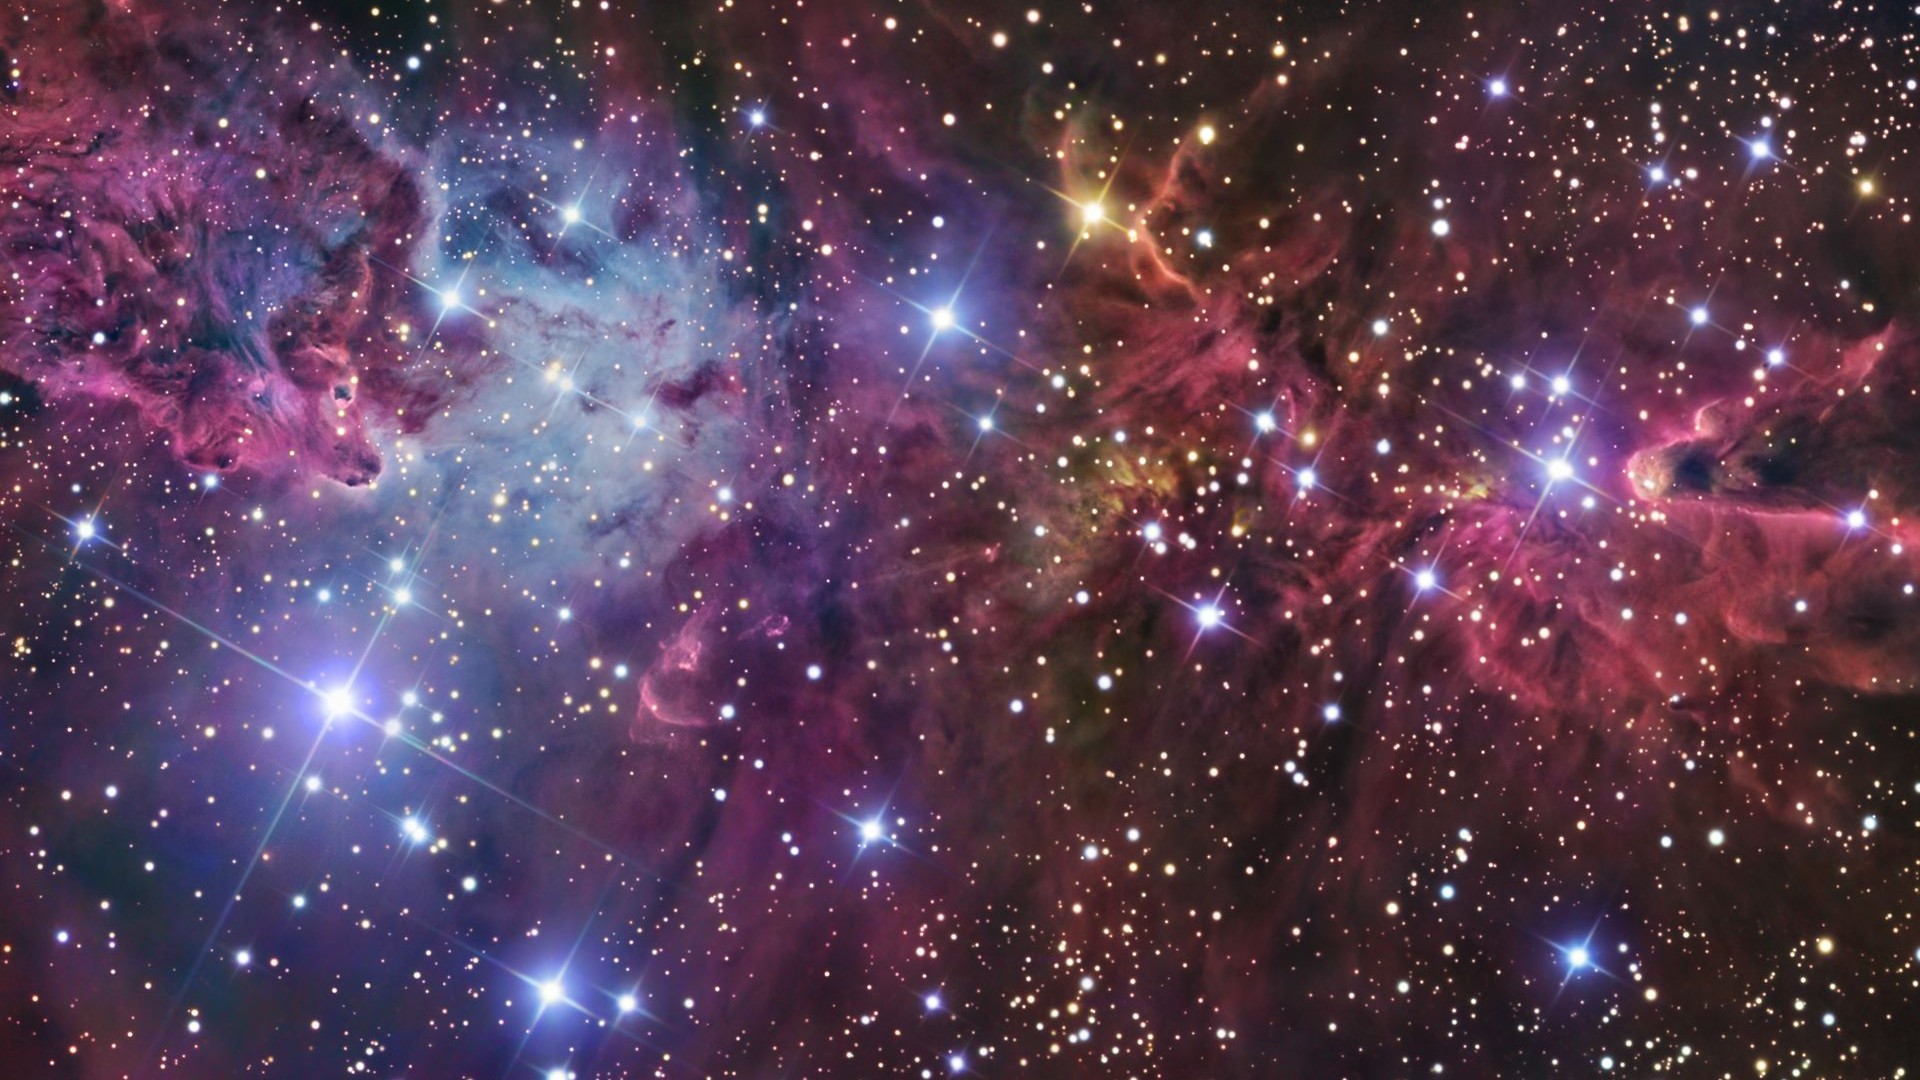 Space Desktop Backgrounds HD With high-resolution 1920X1080 pixel. You can use this wallpaper for your Windows and Mac OS computers as well as your Android and iPhone smartphones